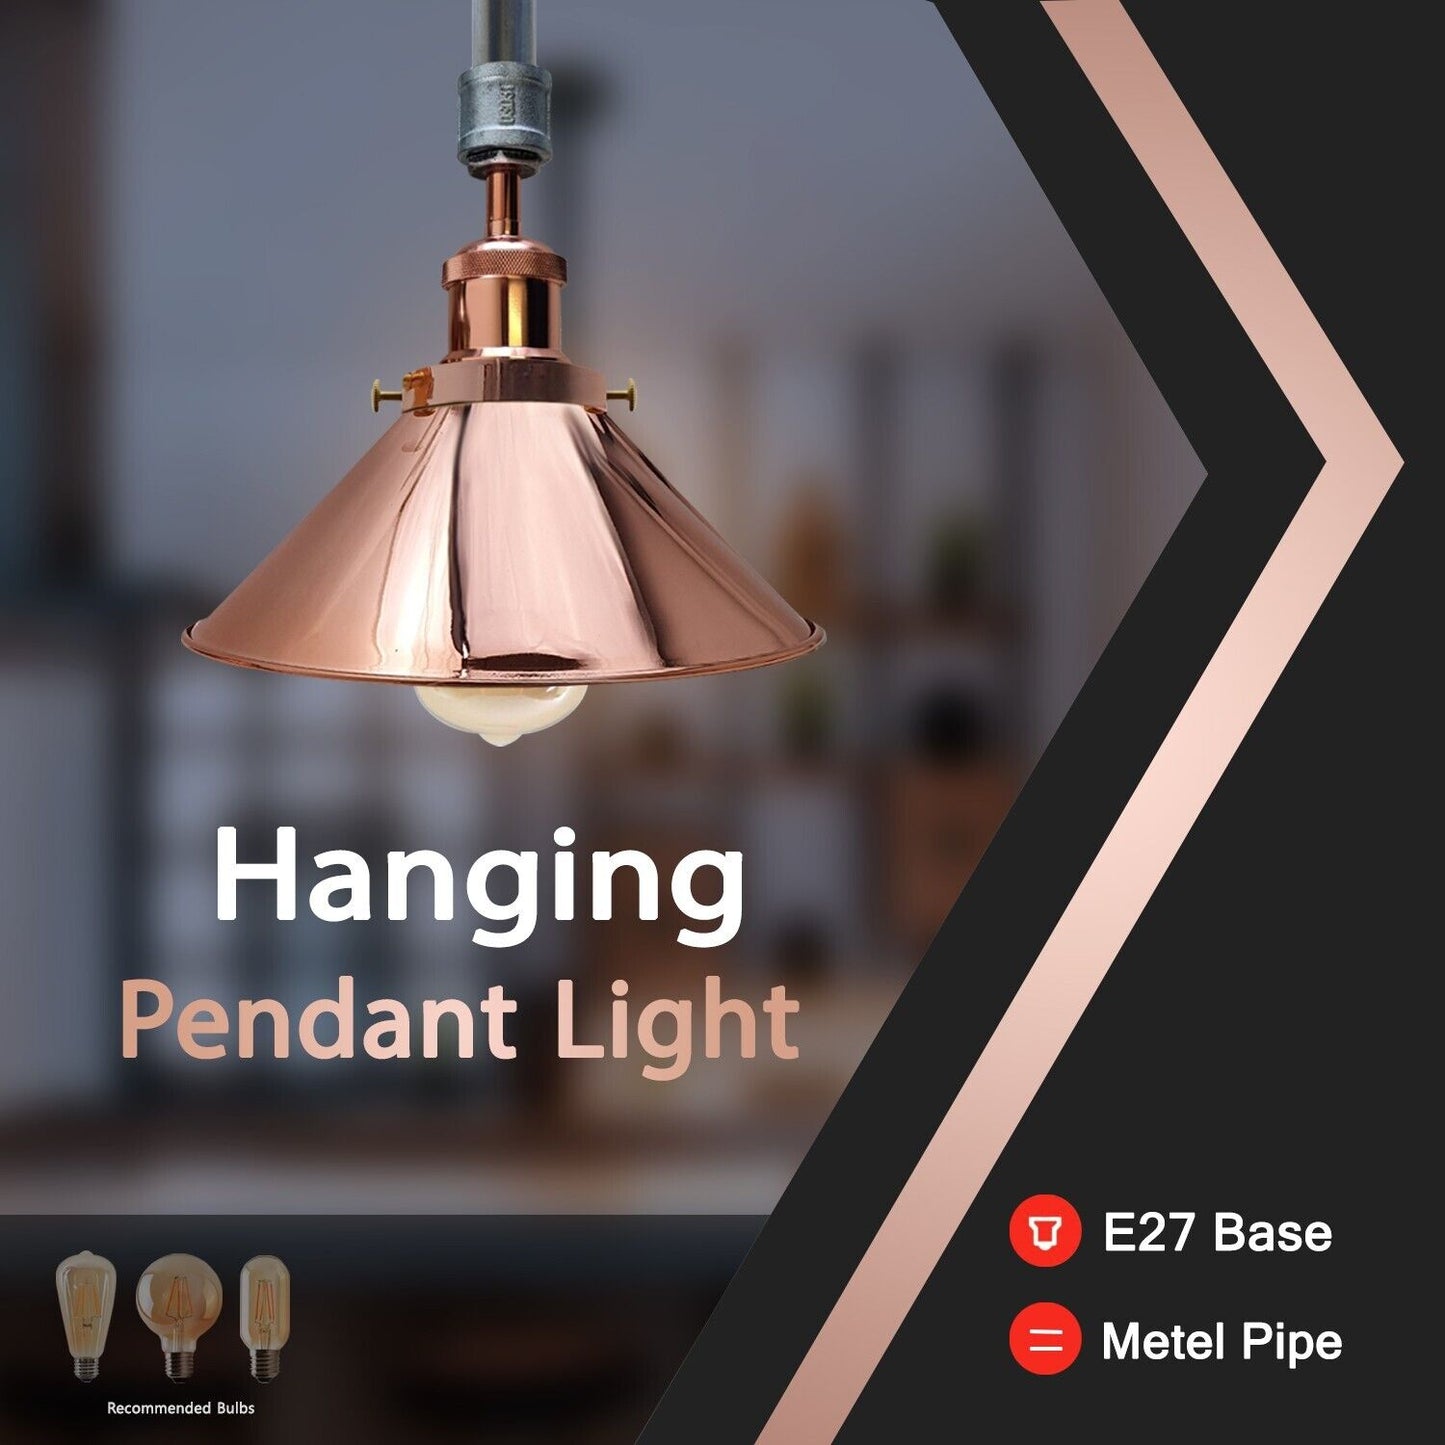 Suspended Vintage Ceiling Pipe Lights Galvanized and Rose Gold - Application Image 1